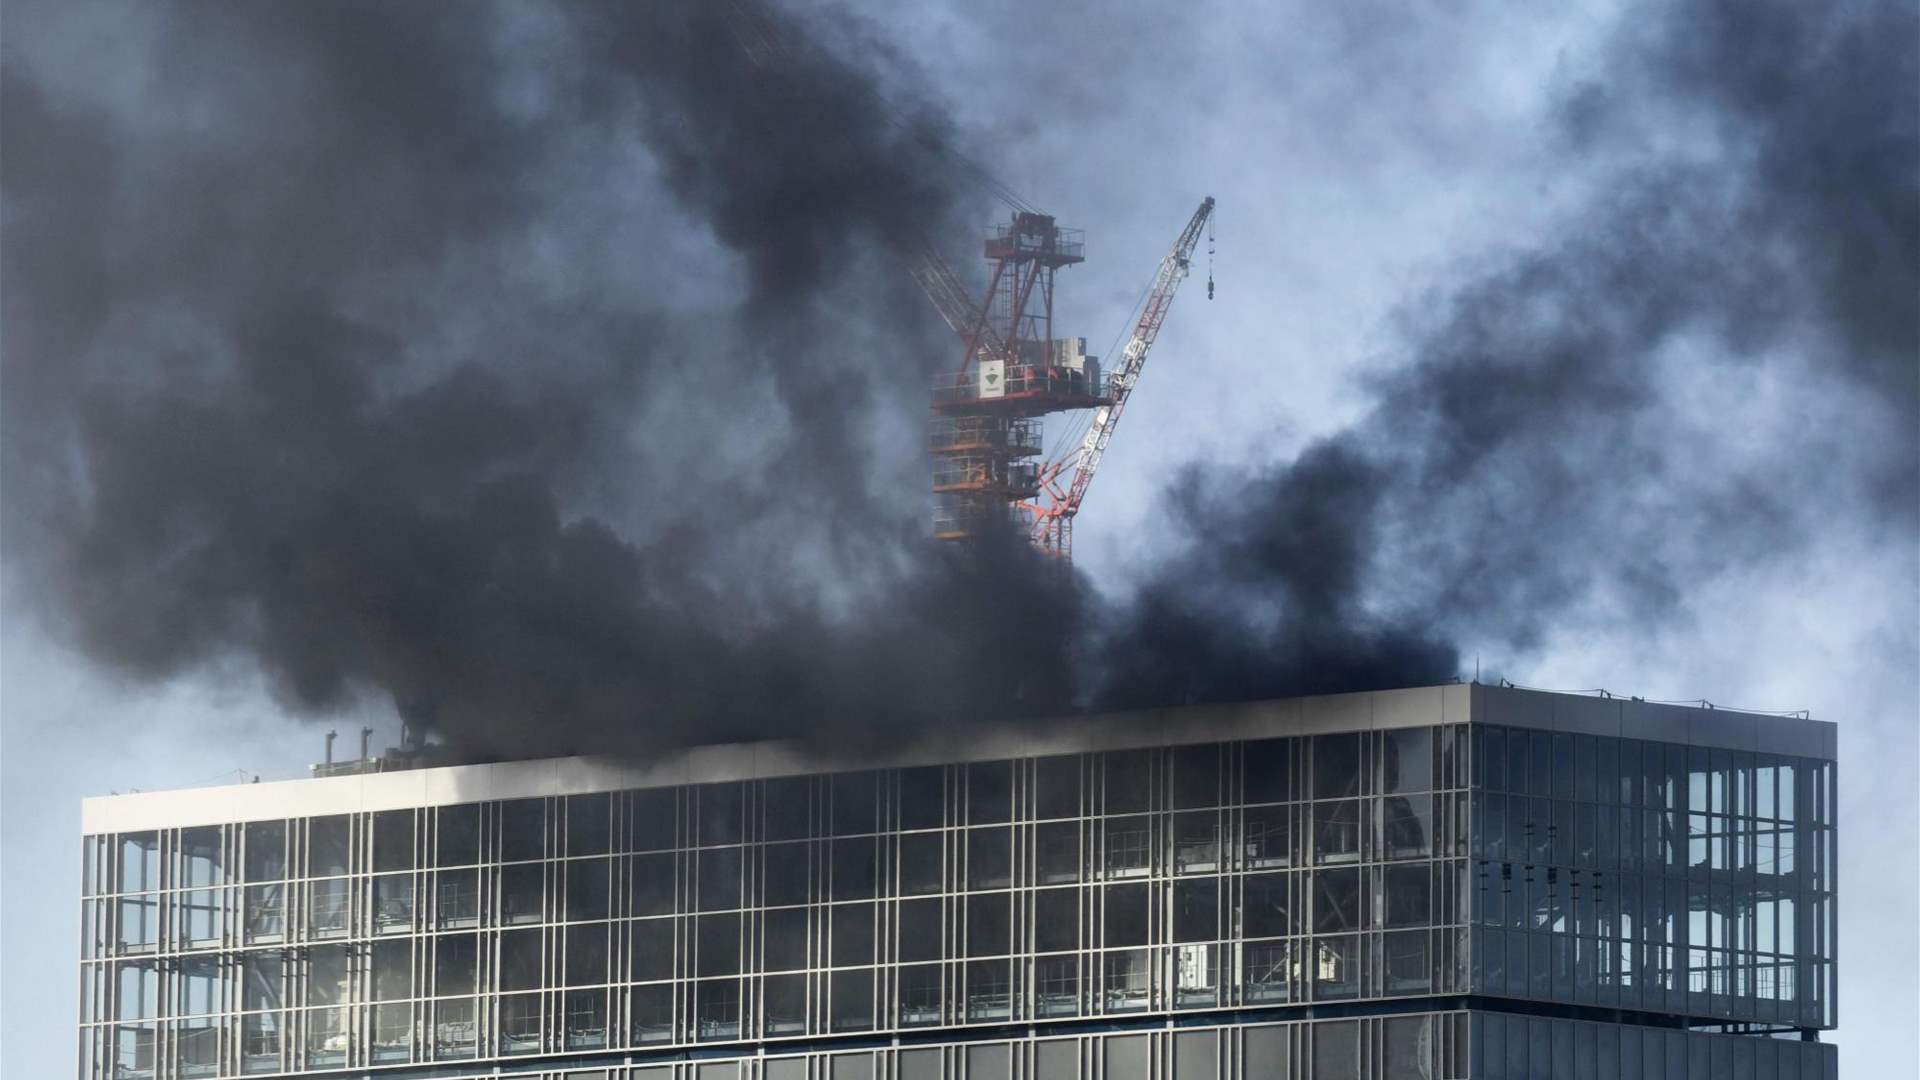 Fire injures four in Tokyo building